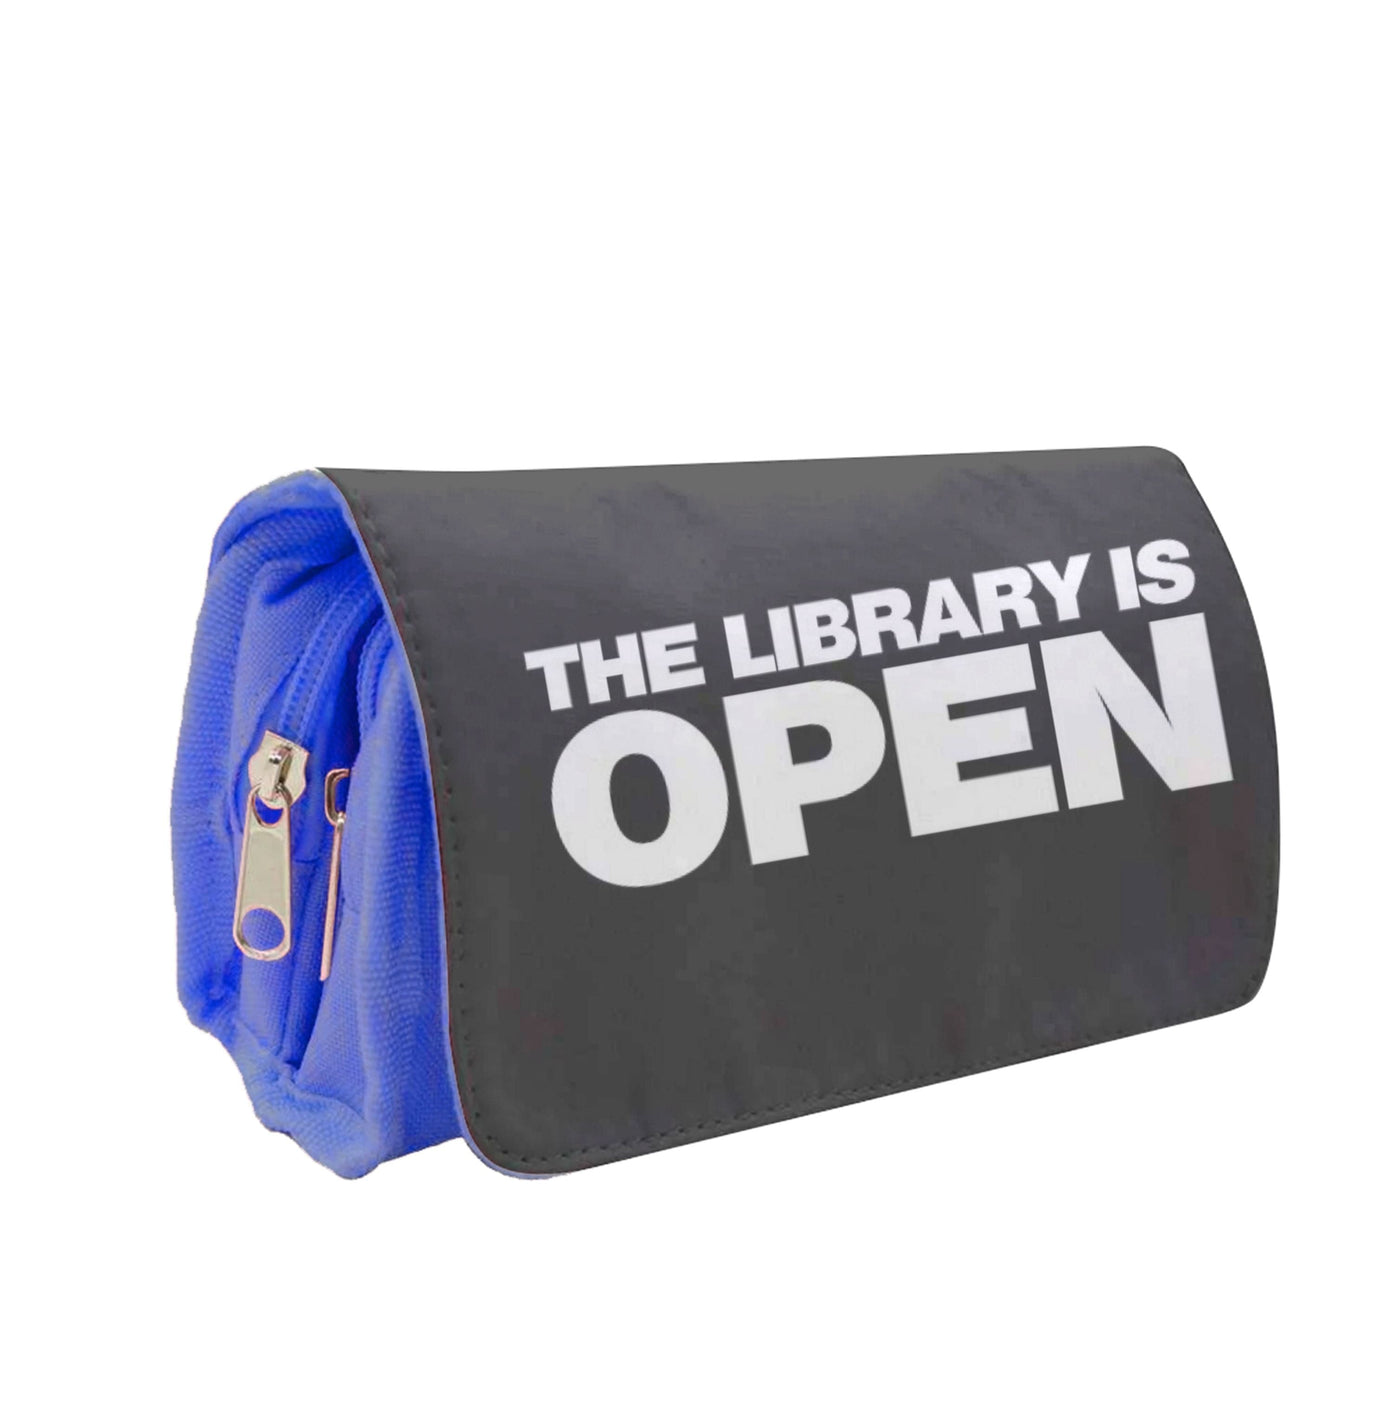 The Library is OPEN - RuPaul's Drag Race Pencil Case